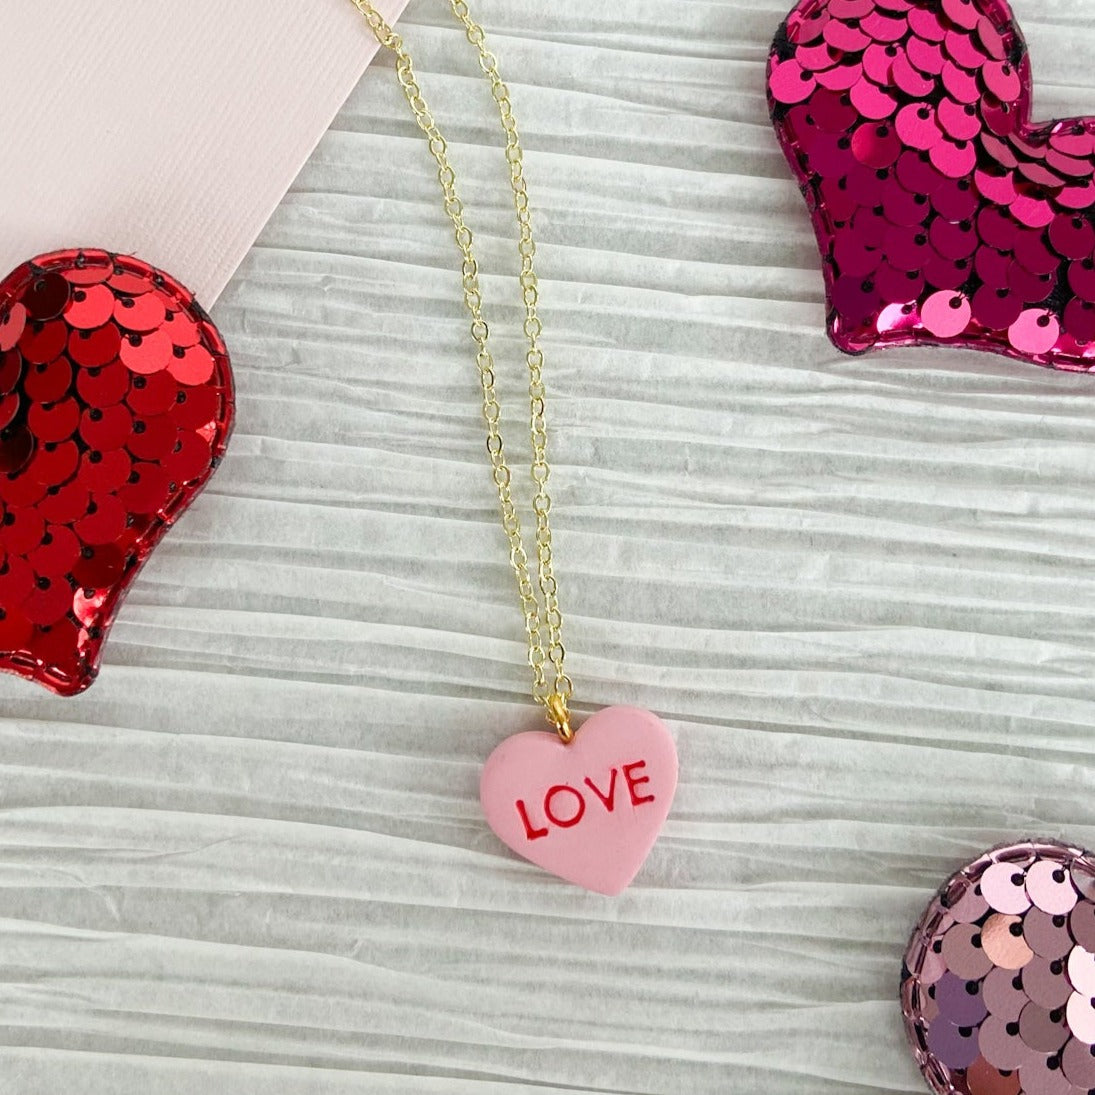 Conversation Heart Necklace - LOVE in Pink